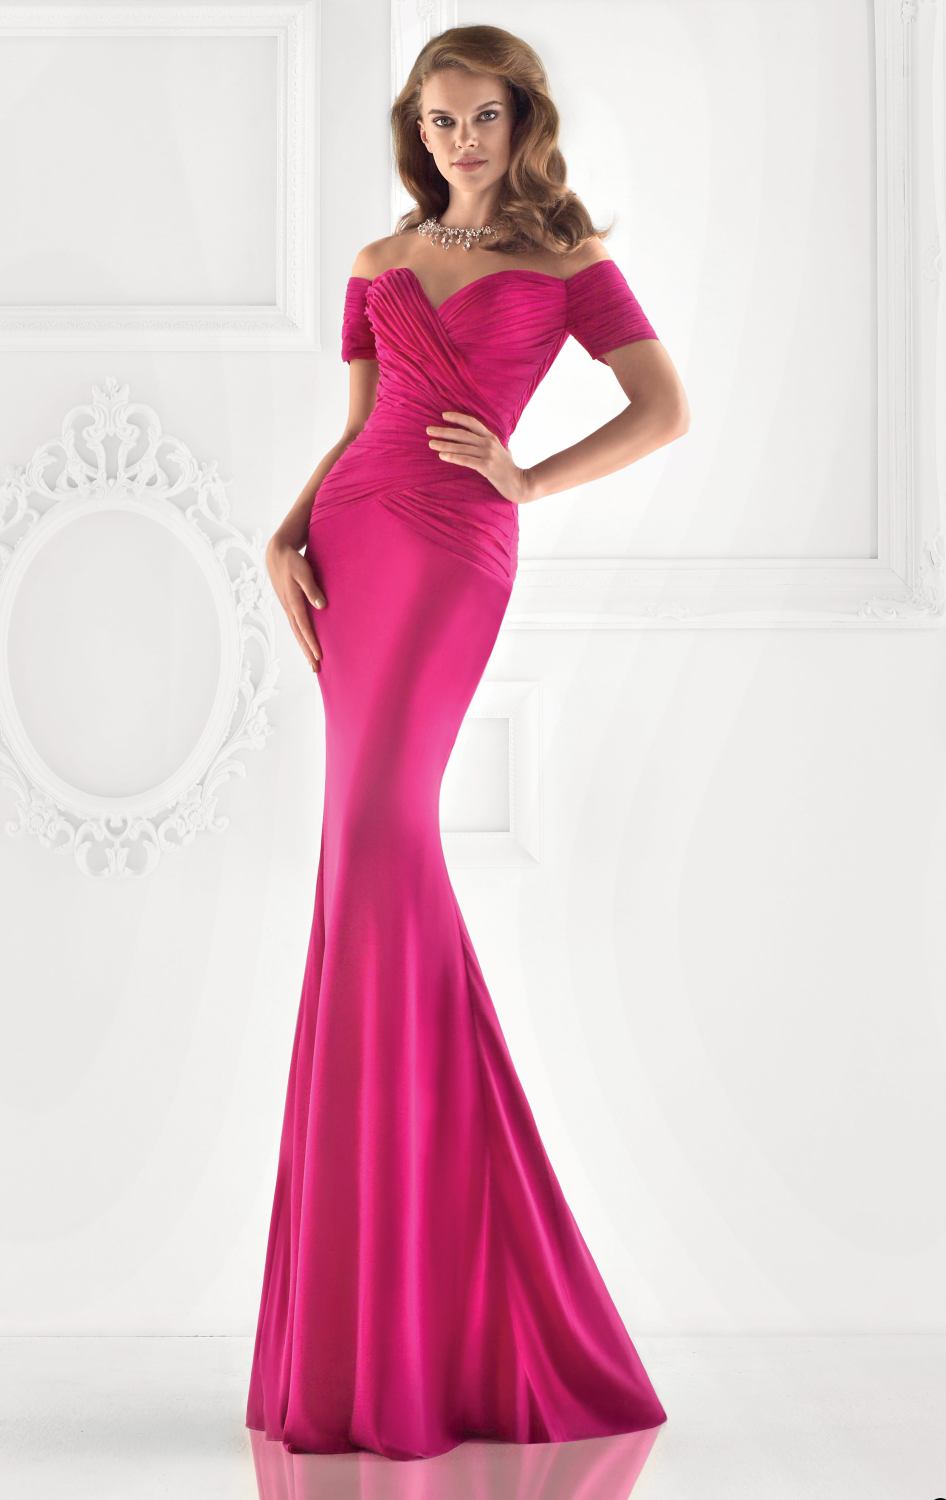 High Quality Low Cut Evening Gowns-Buy Cheap Low Cut Evening Gowns ...